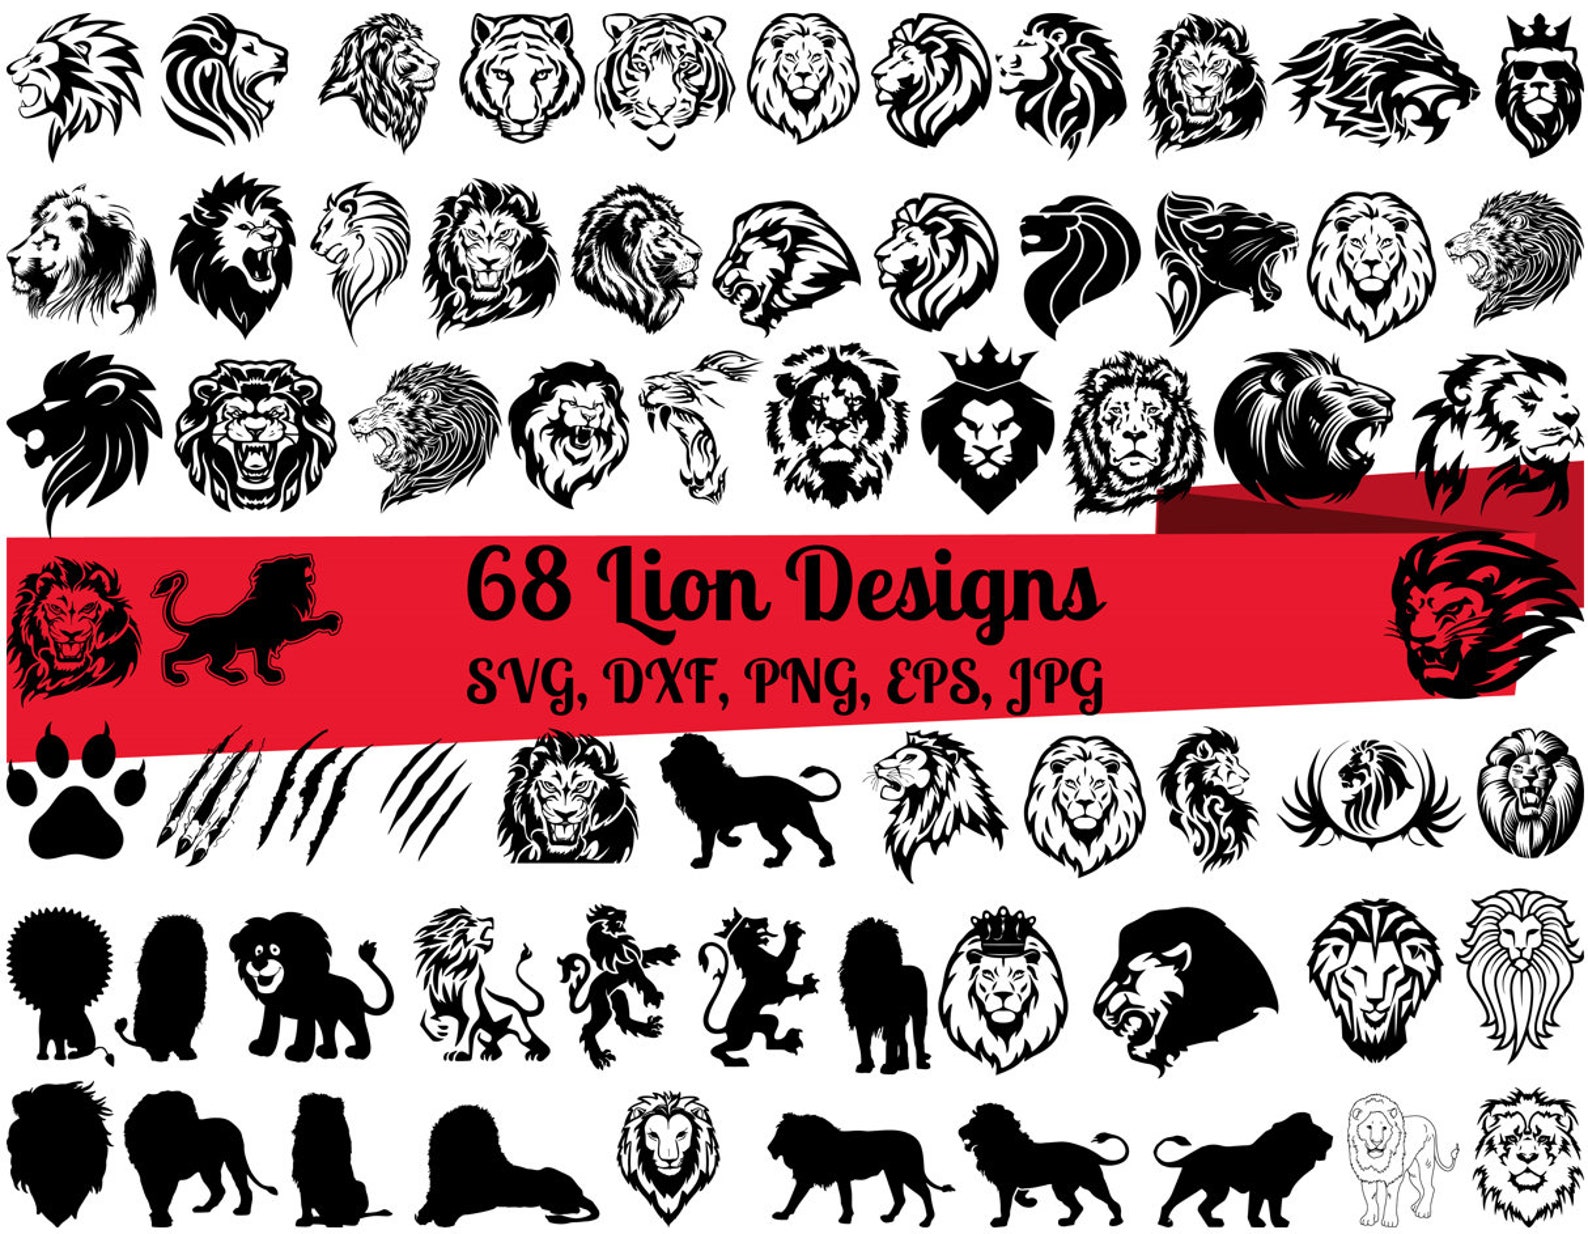 Black lions in the different poses.